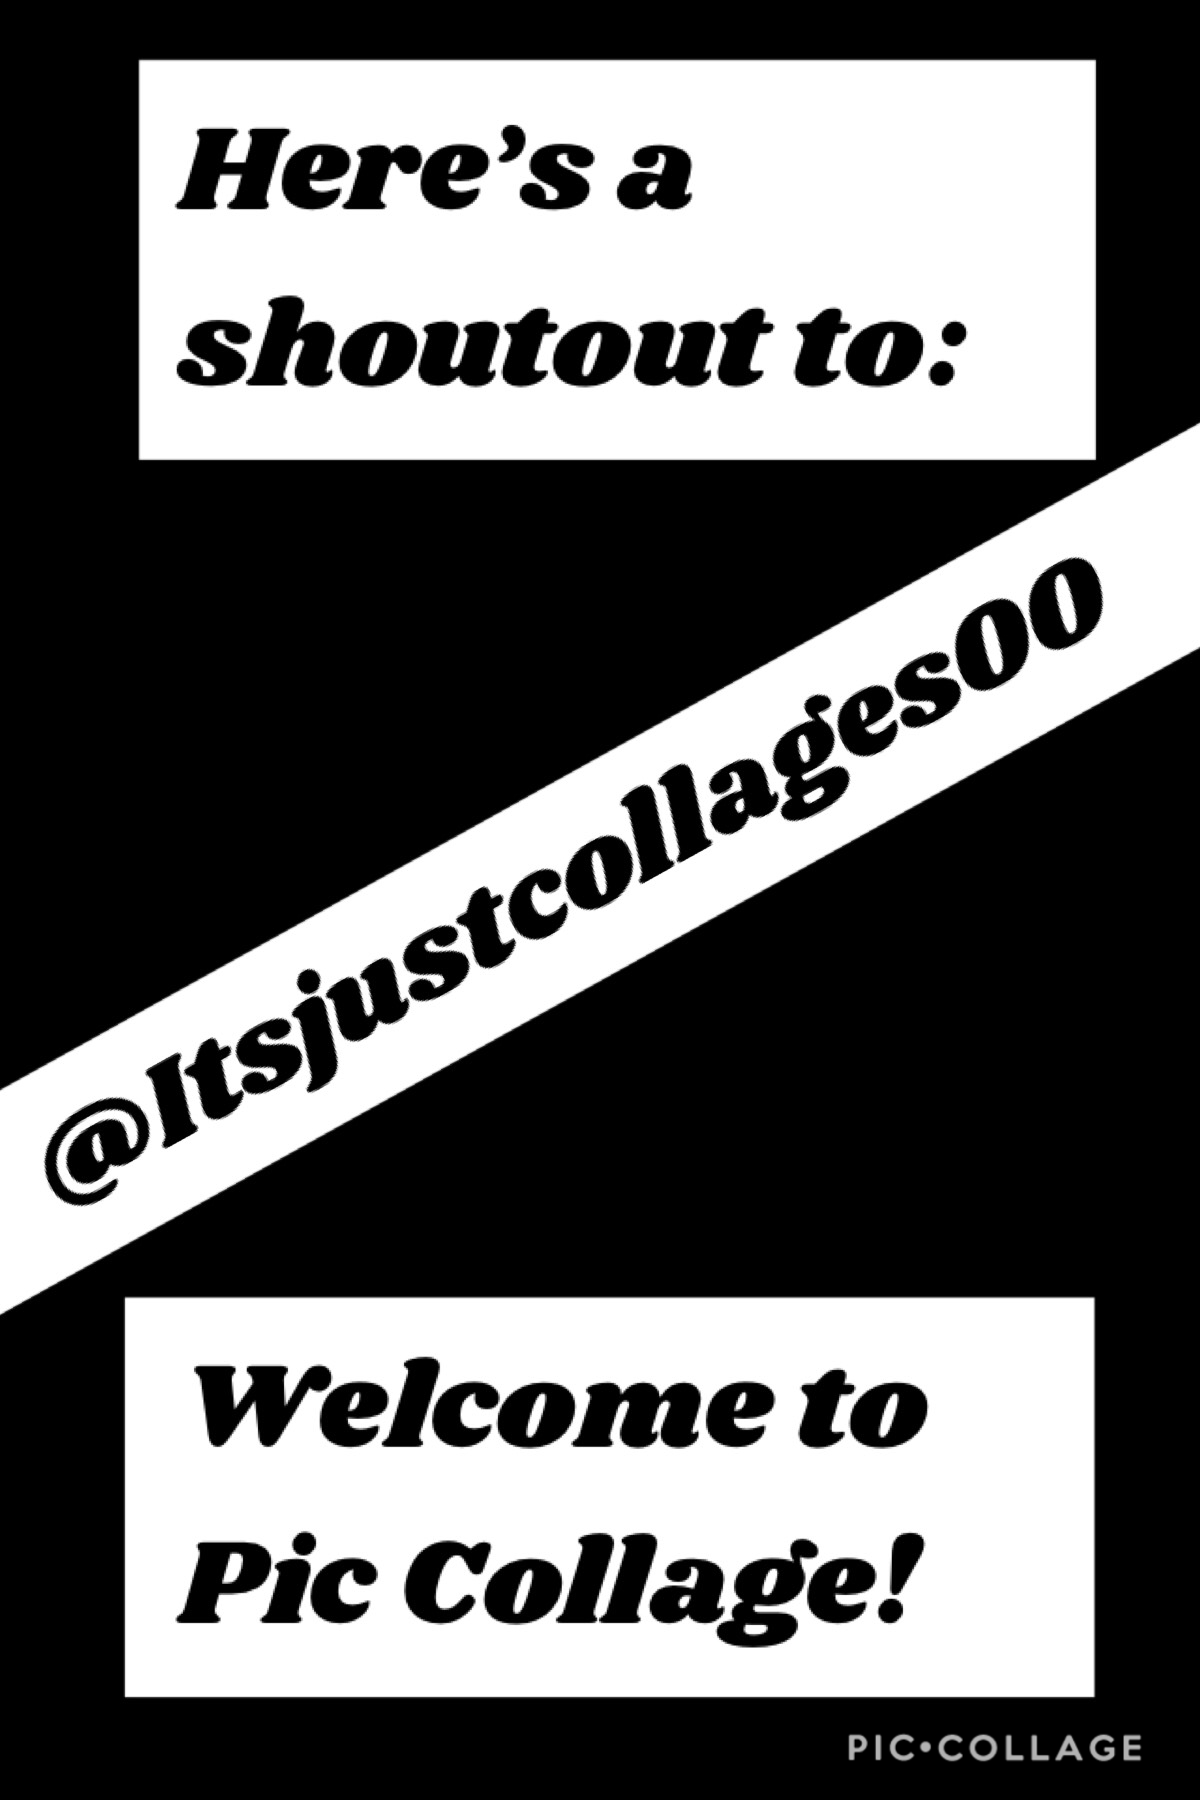 Shoutout of the week goes to @Itsjustcollages00! Welcome to Pic Collage!!! 